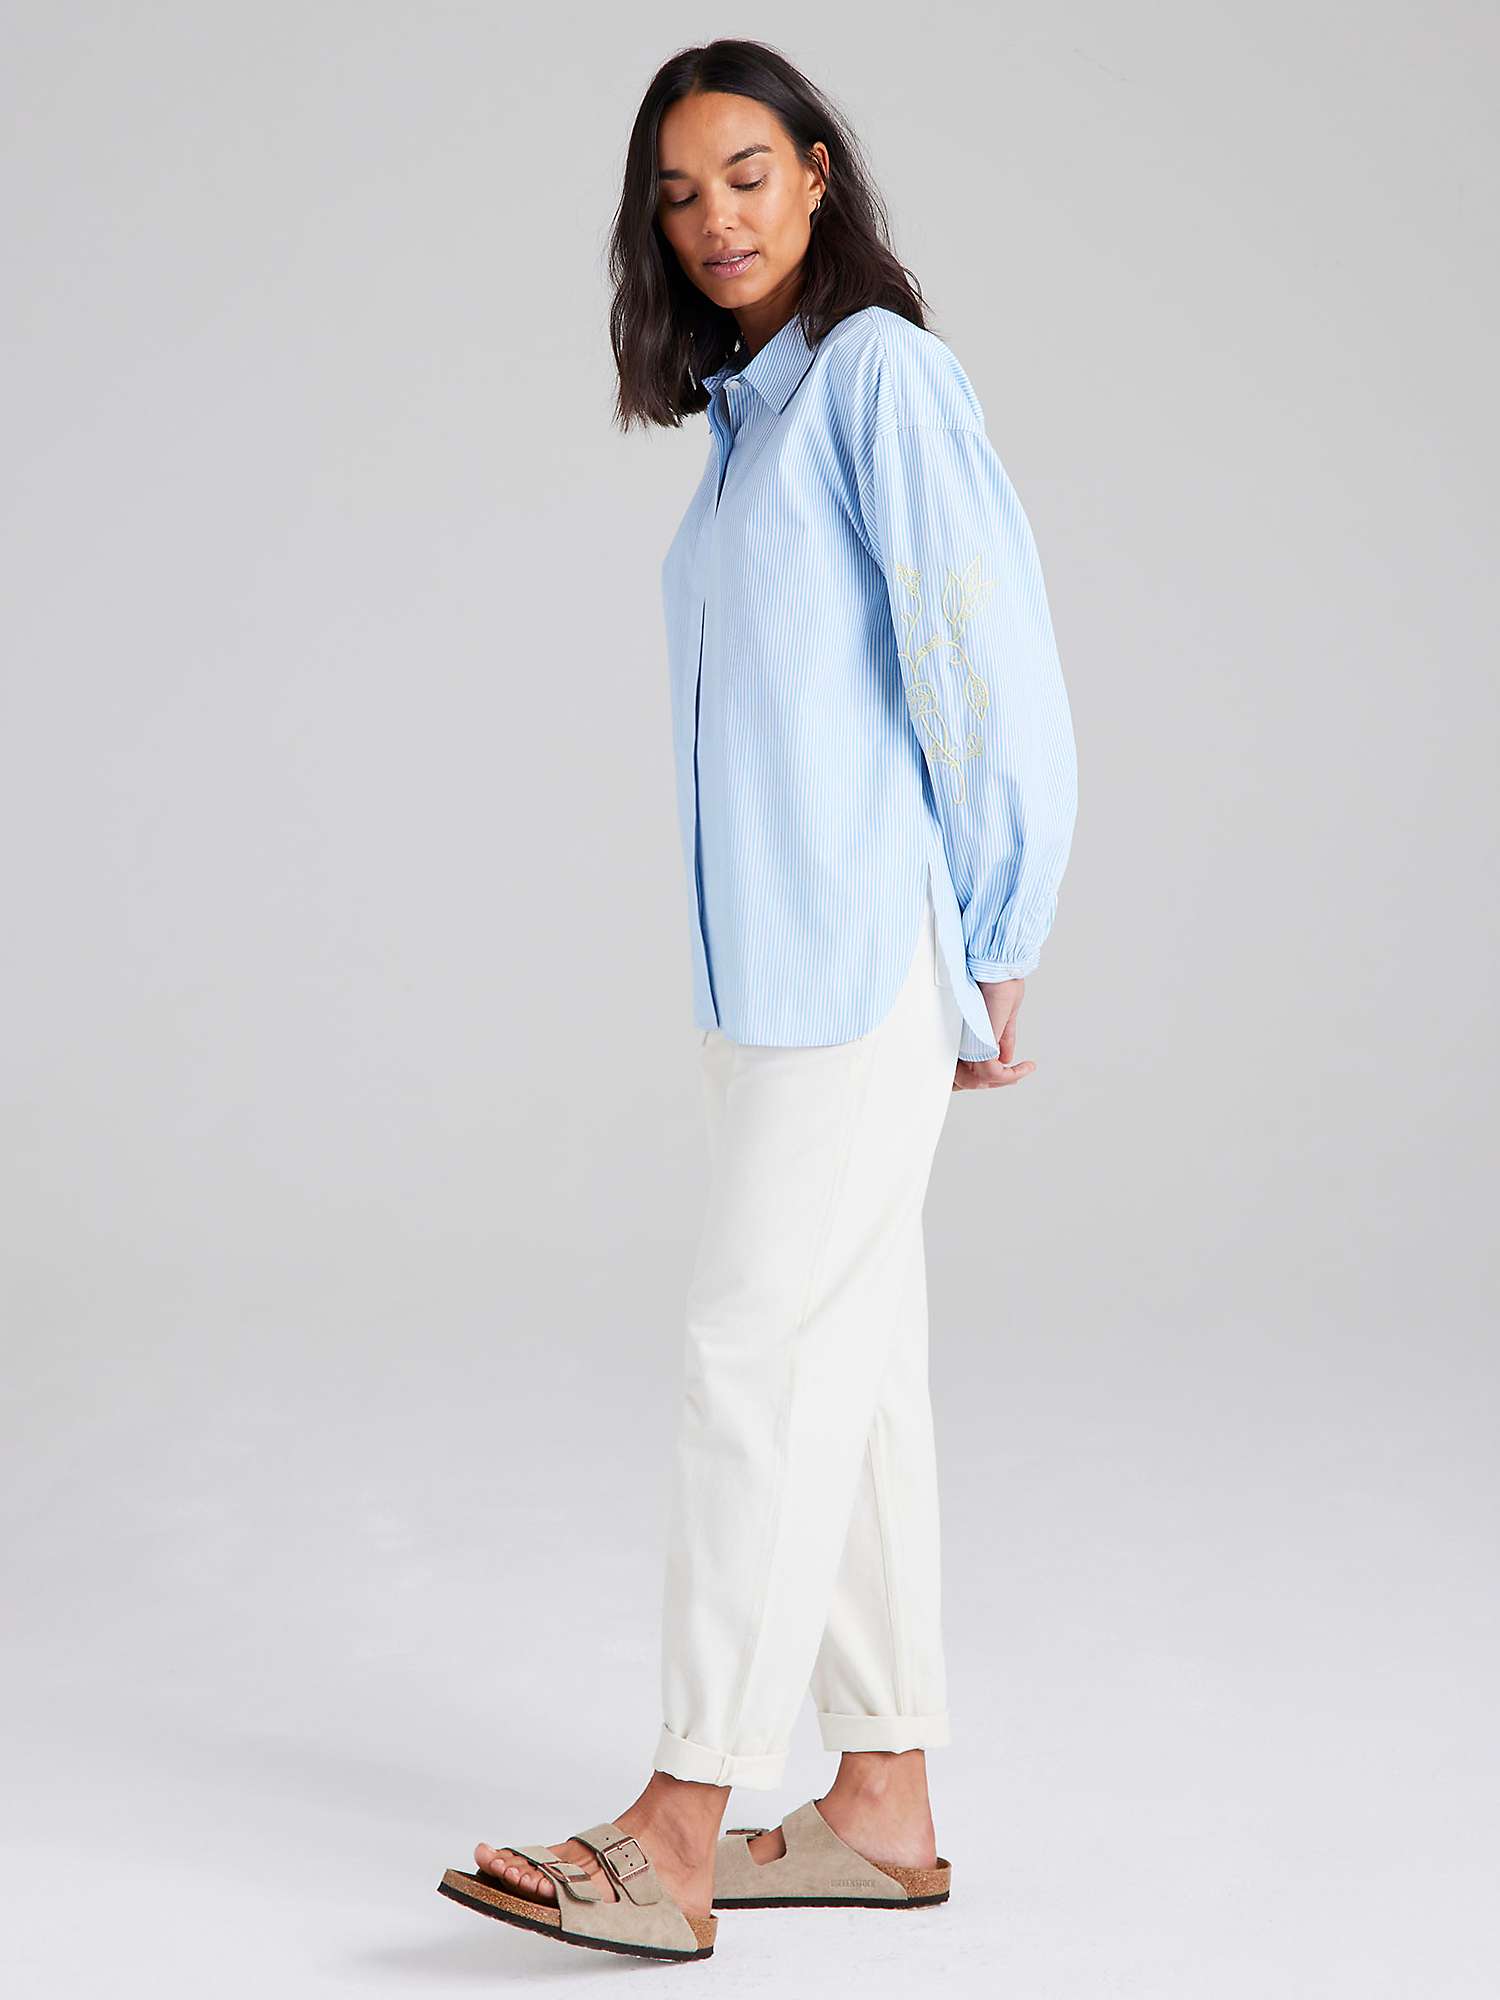 Buy Cape Cove Stripe Botanical Embroidered Blouse, Ice Blue Online at johnlewis.com